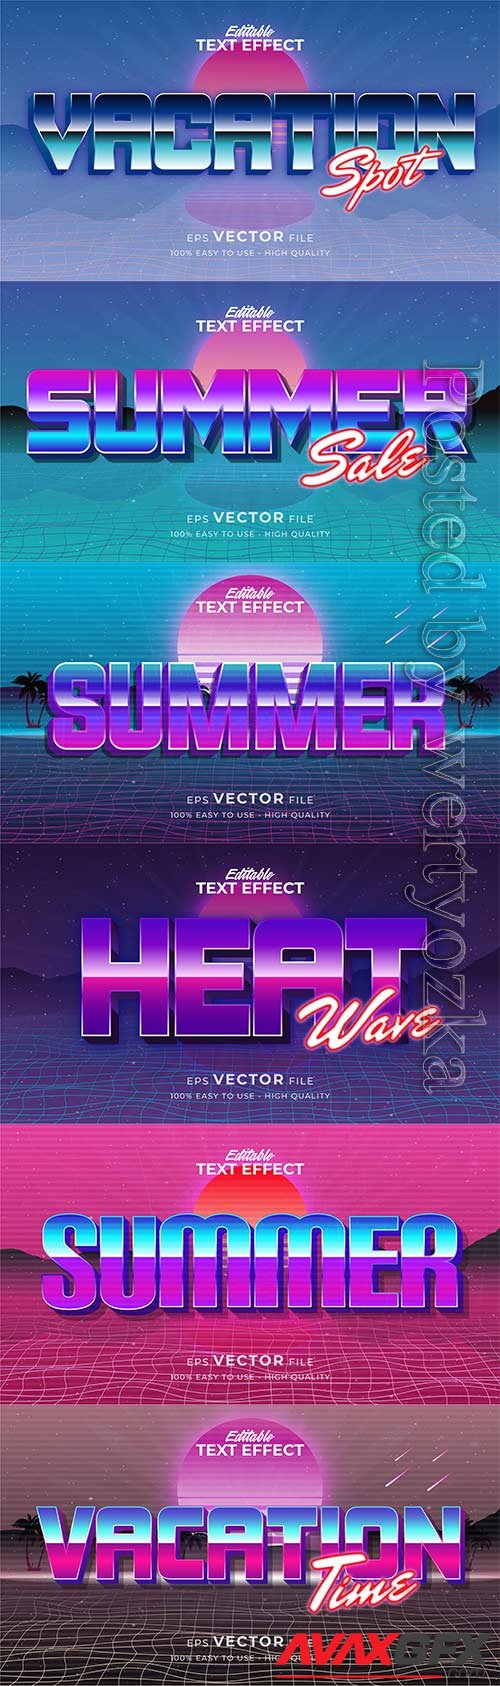 Text style effect, retro summer text in grunge style vol 7